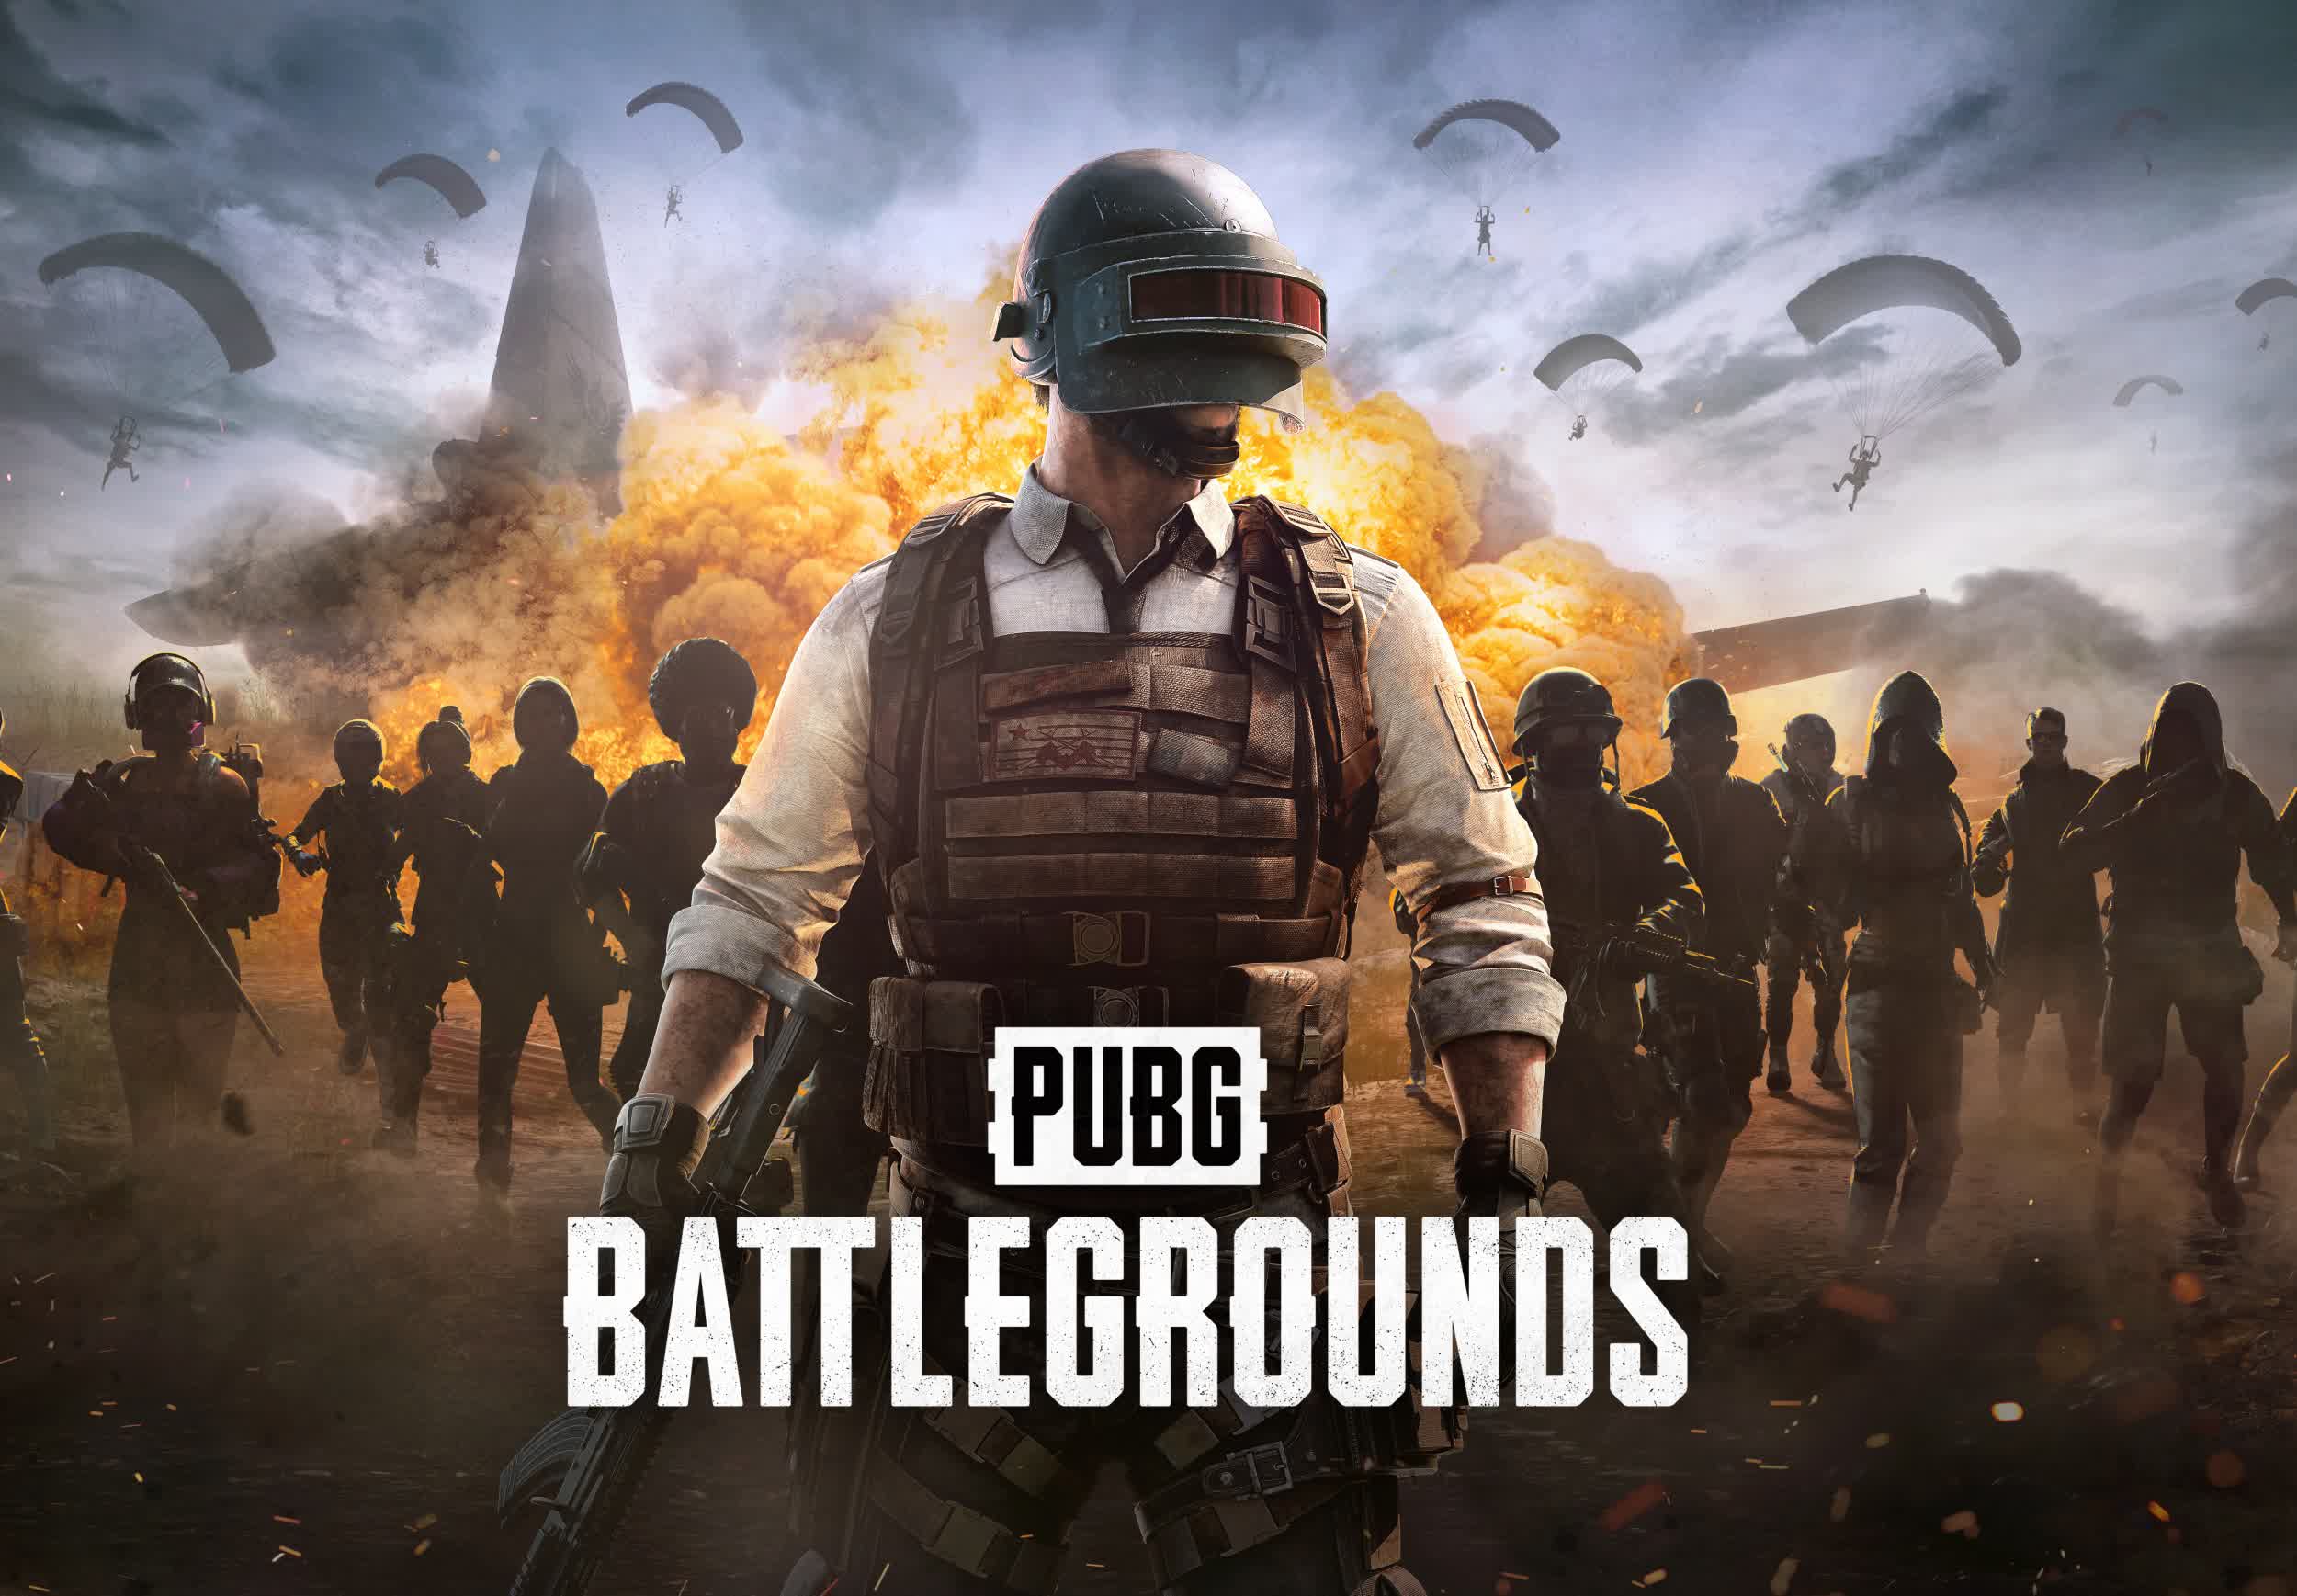 PUBG experiences massive player growth after switching to free-to-play model